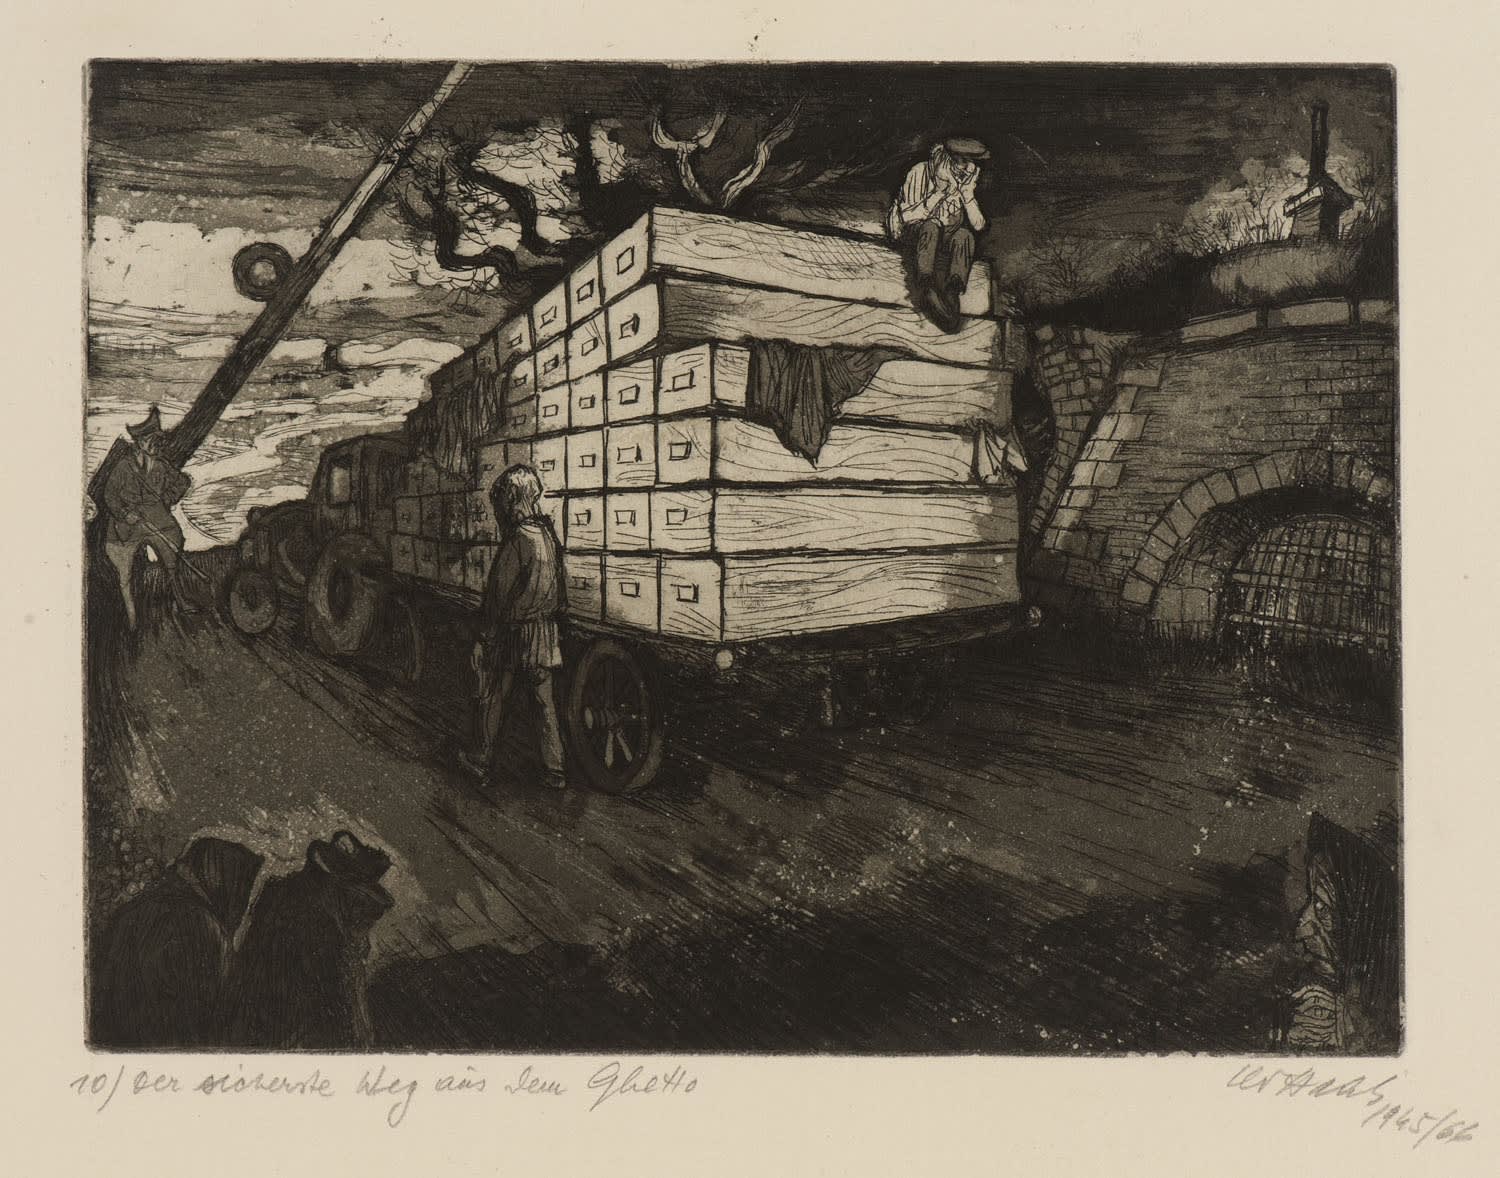 Leo Haas (1901-1983) Jew Ghetto (Terezín-Theresienstadt series) 1945-66 Drypoint and aquatint on paper 21 x 28 cm Ben Uri Collection © Leo Haas estate To see and discover more about this artist click here